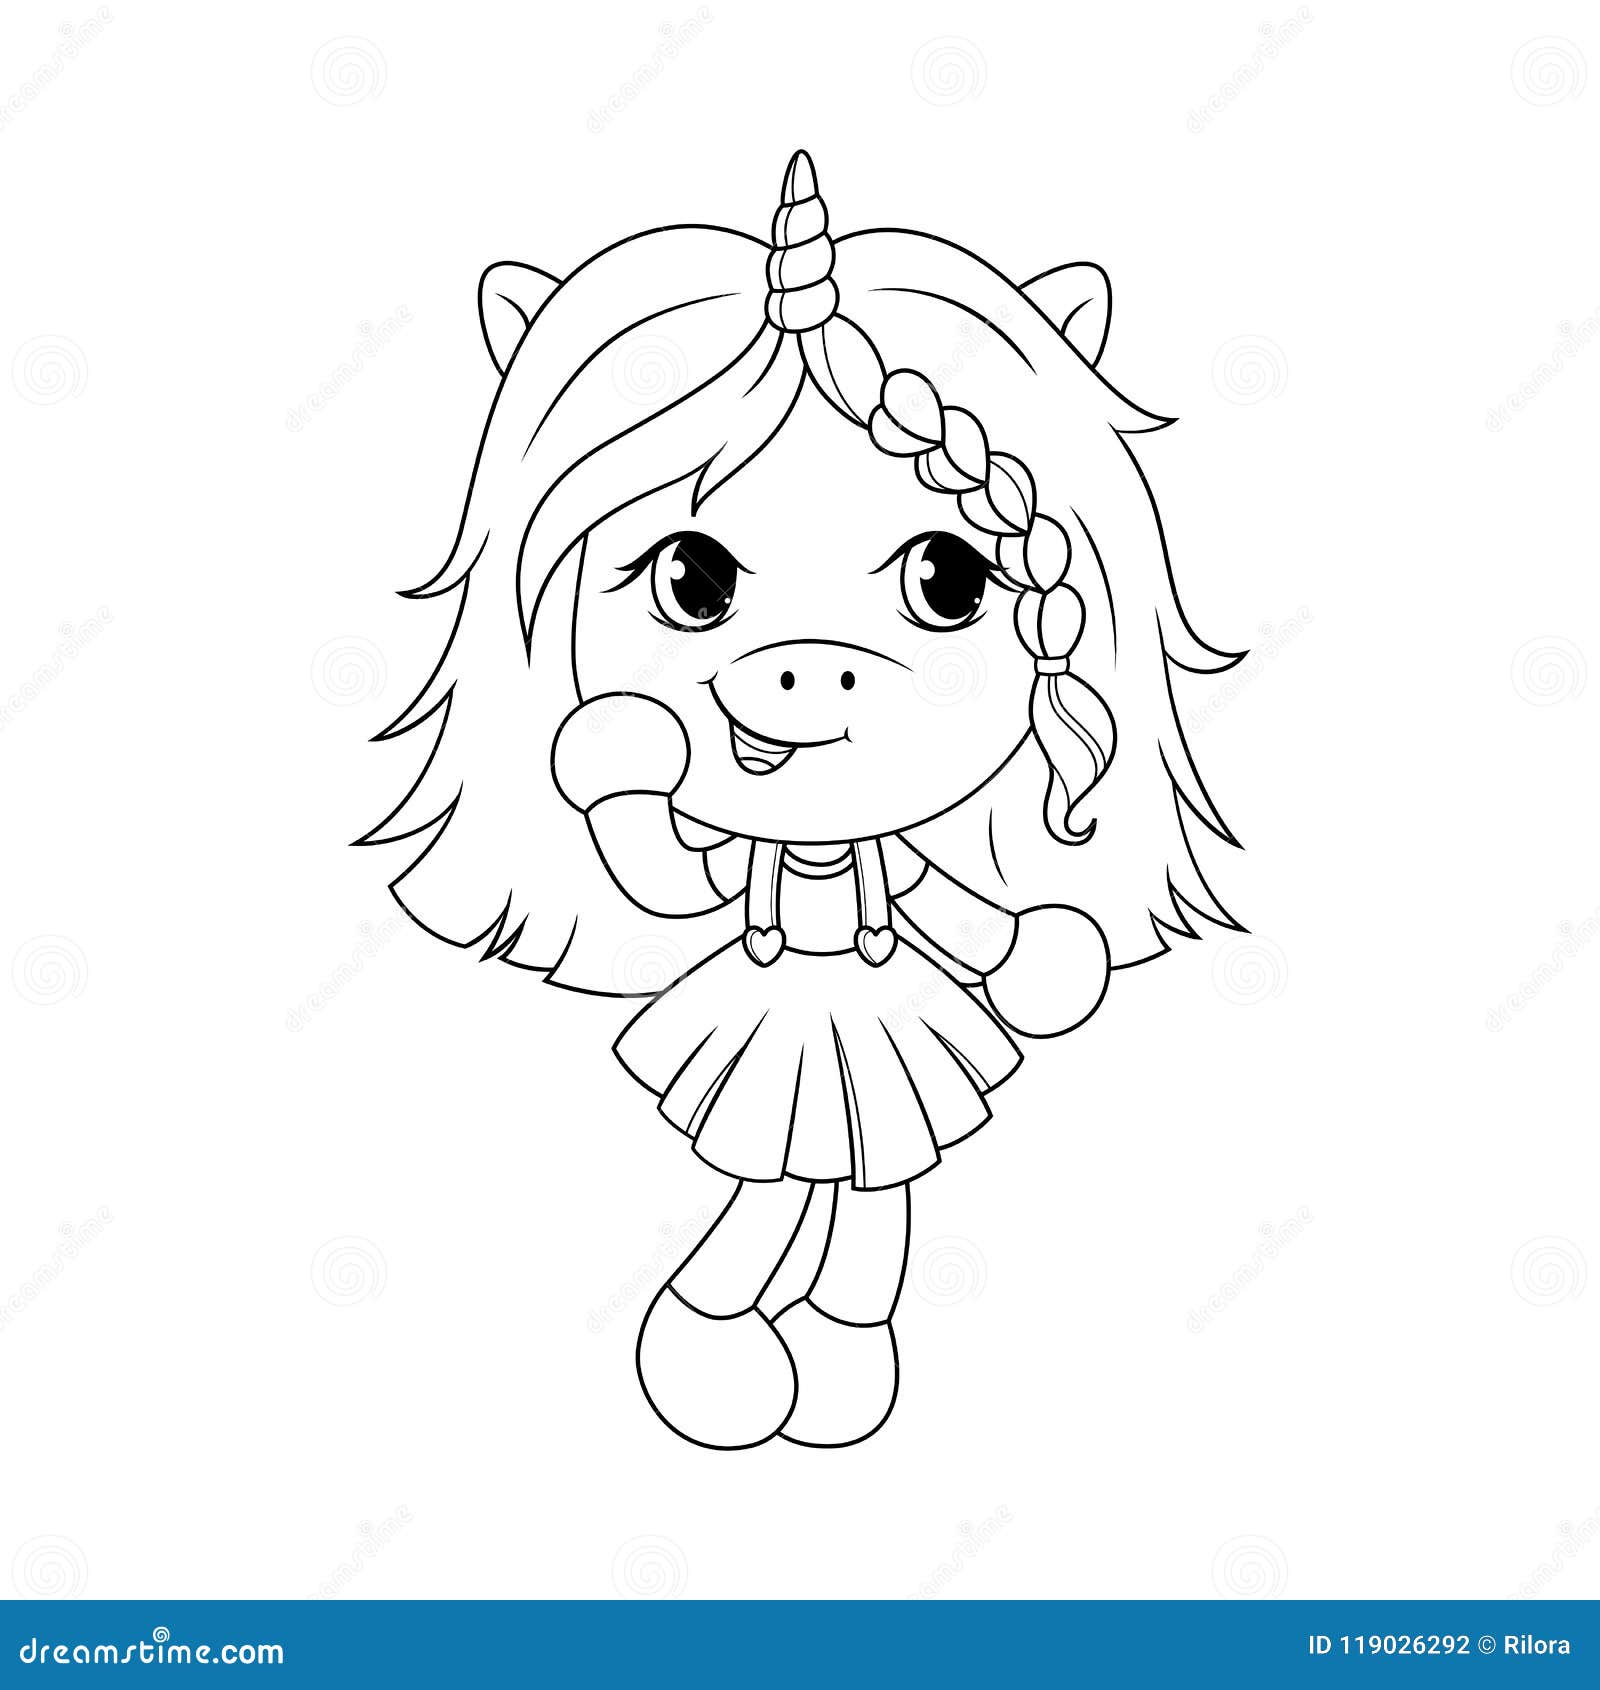  Cute  Baby Unicorn  Coloring  Page  For Girls Vector Stock 